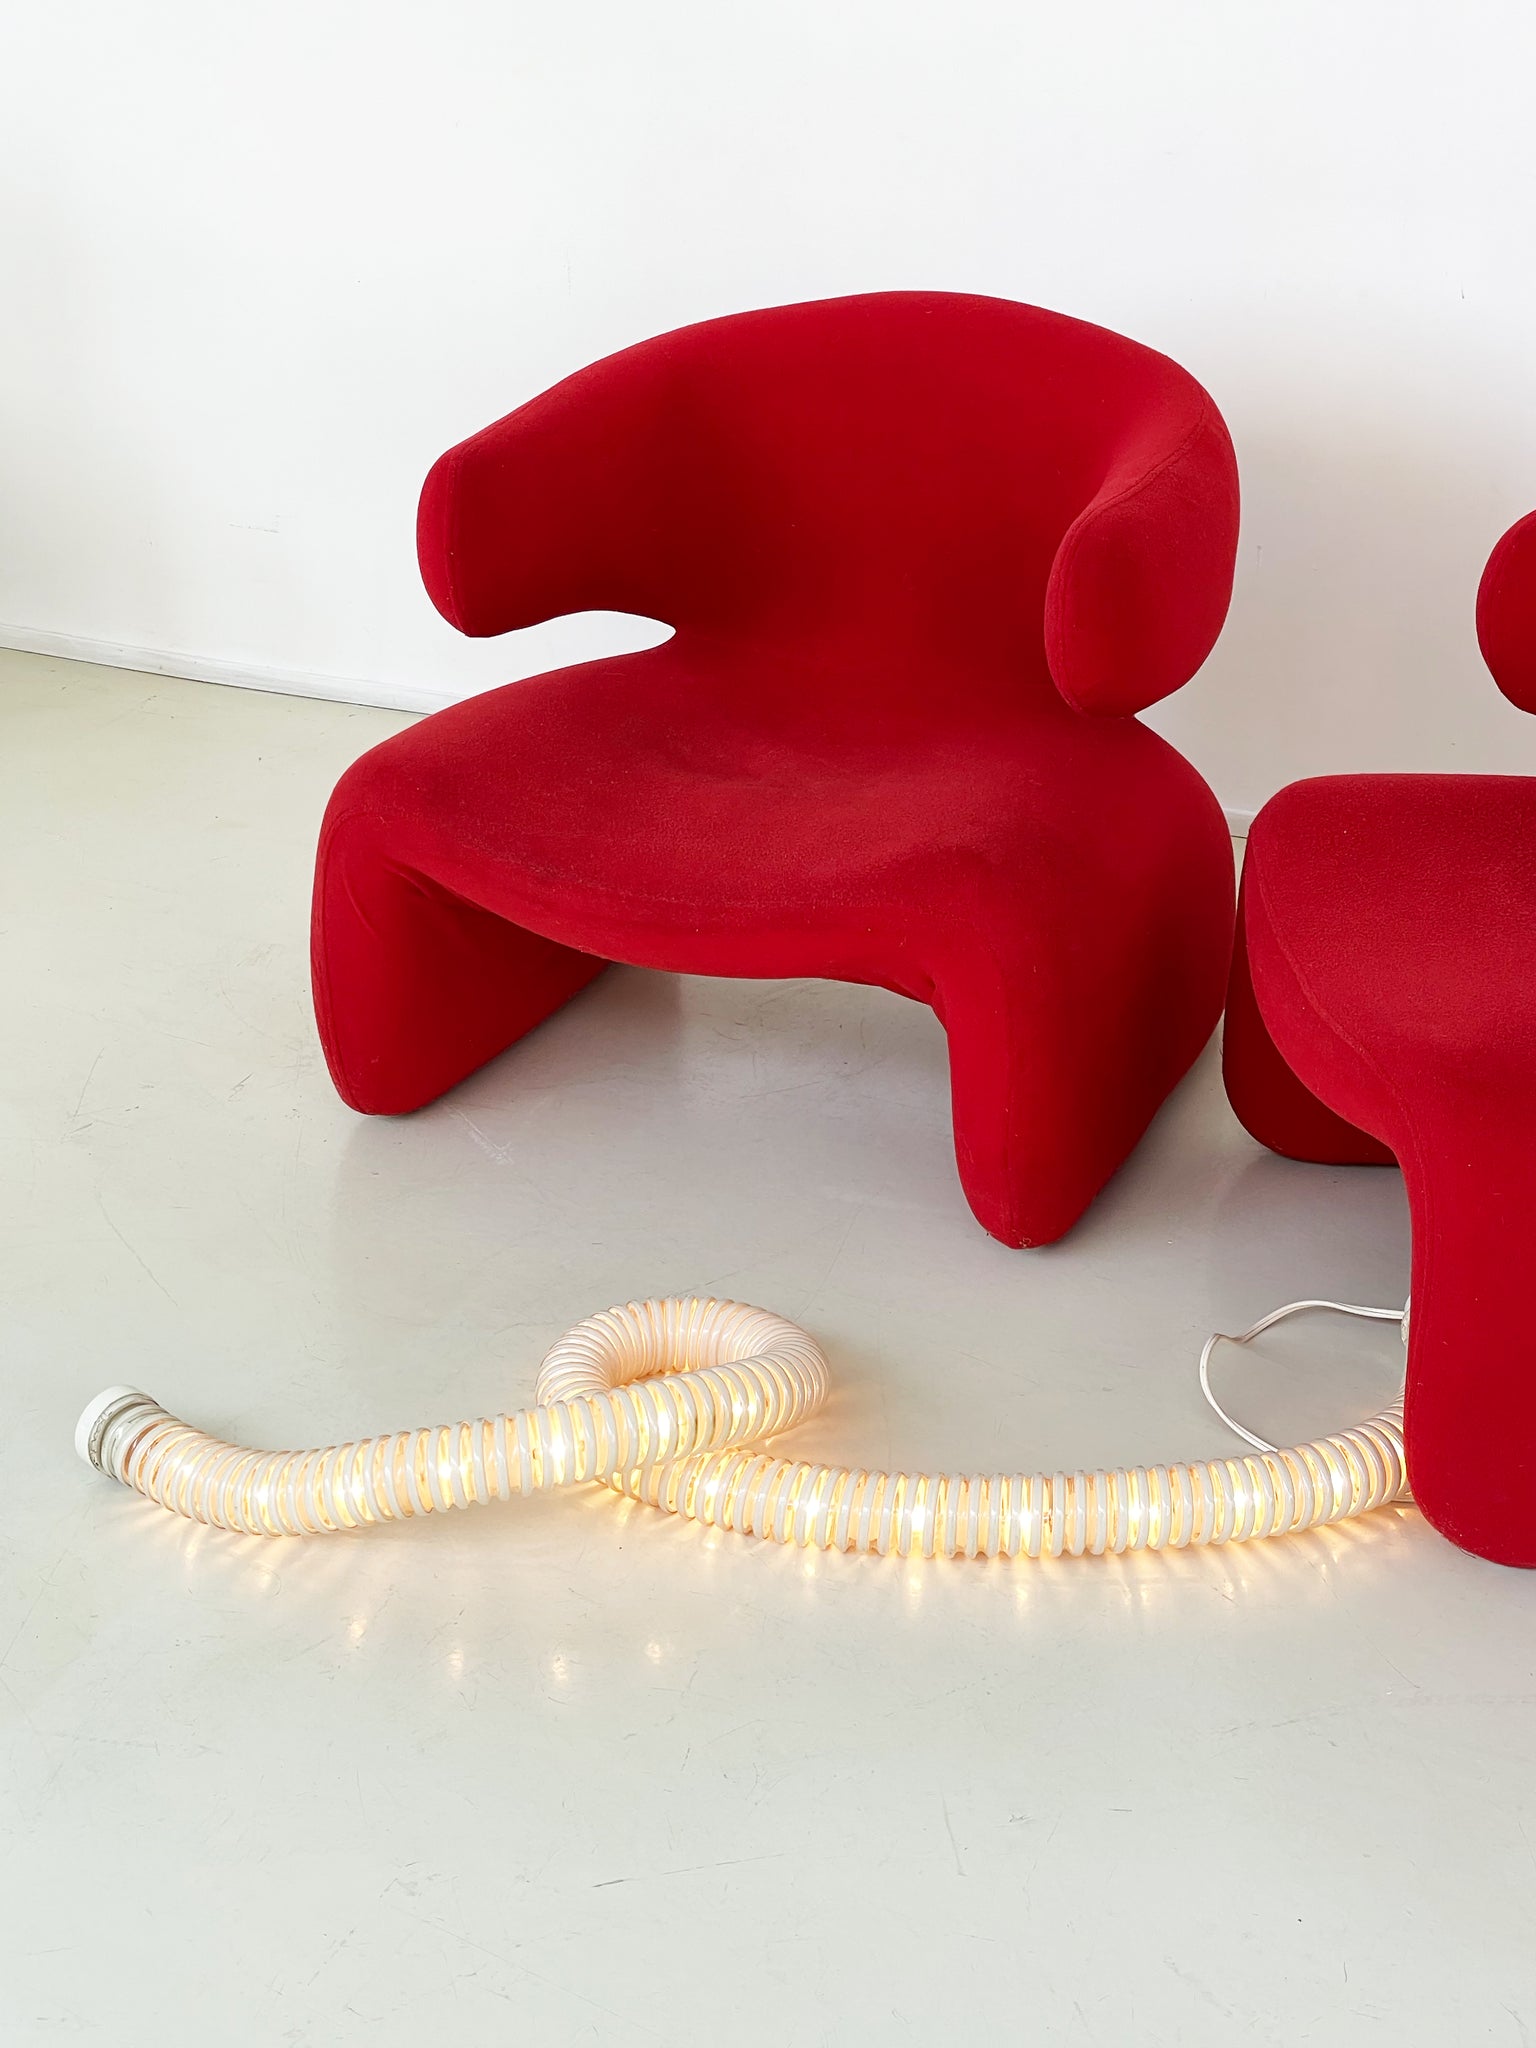 1965 Red Olivier Mourgue "Djinn" Arm Chairs - each